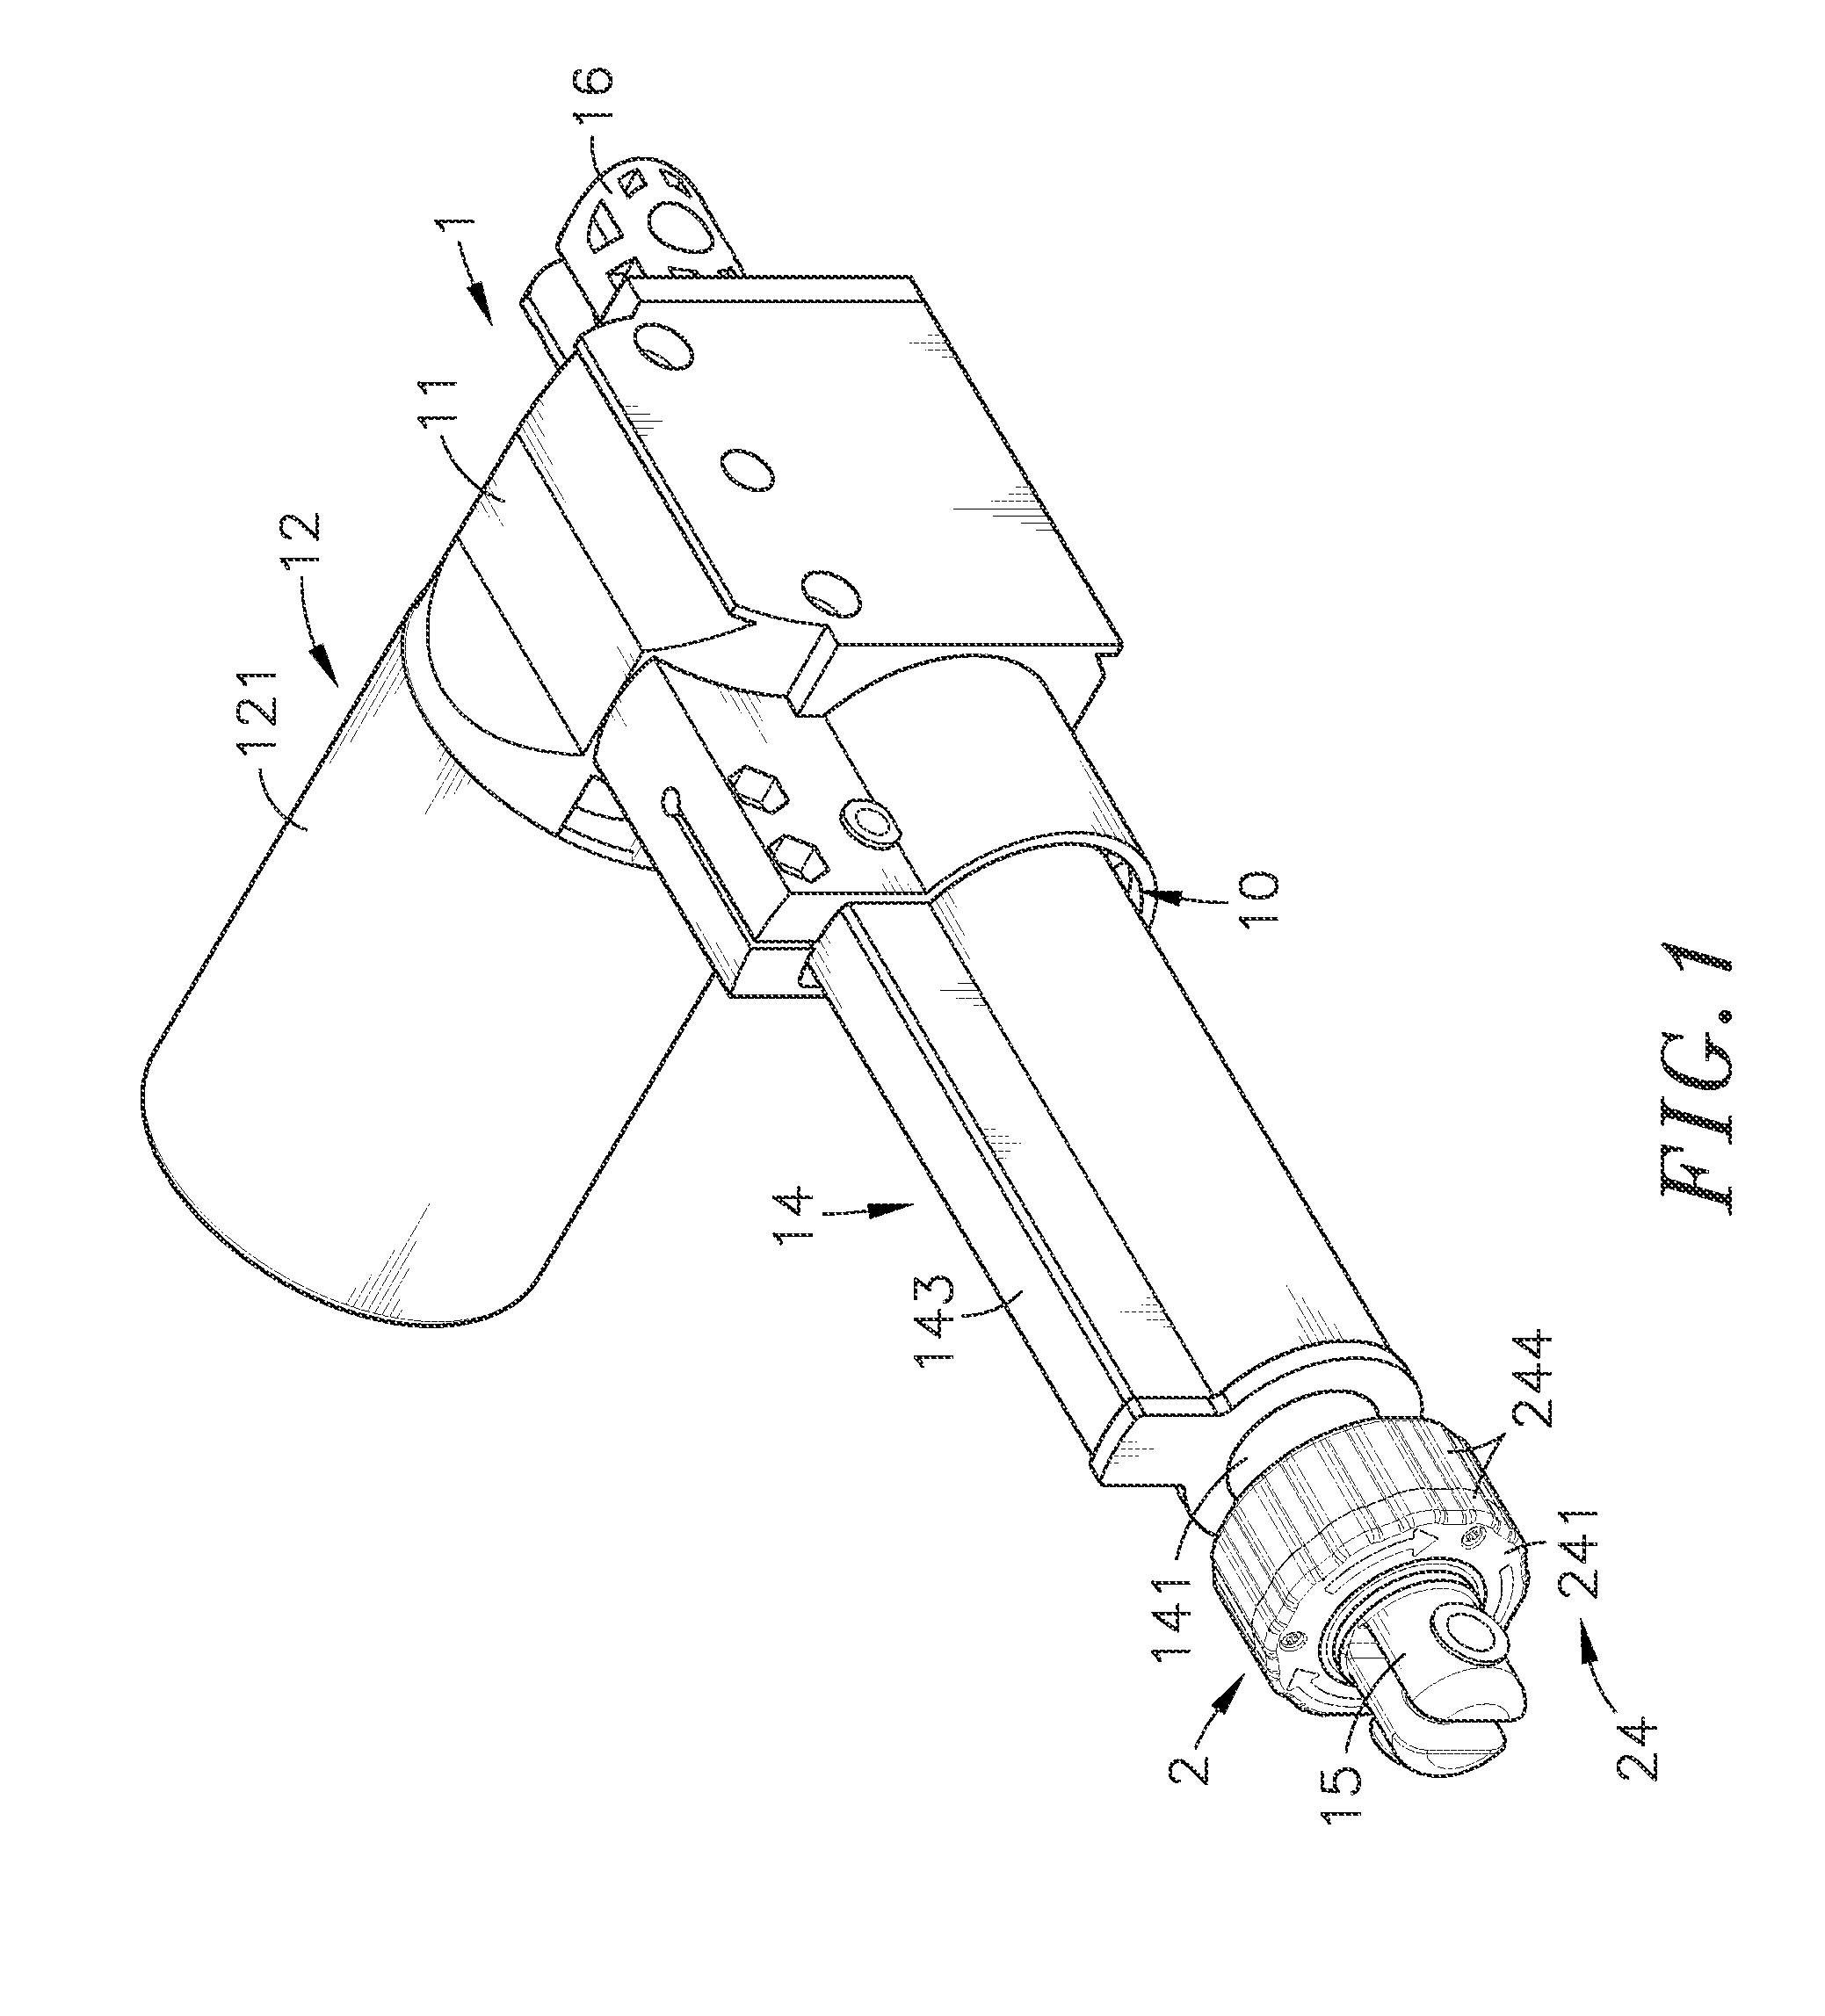 Electric push bar assembly